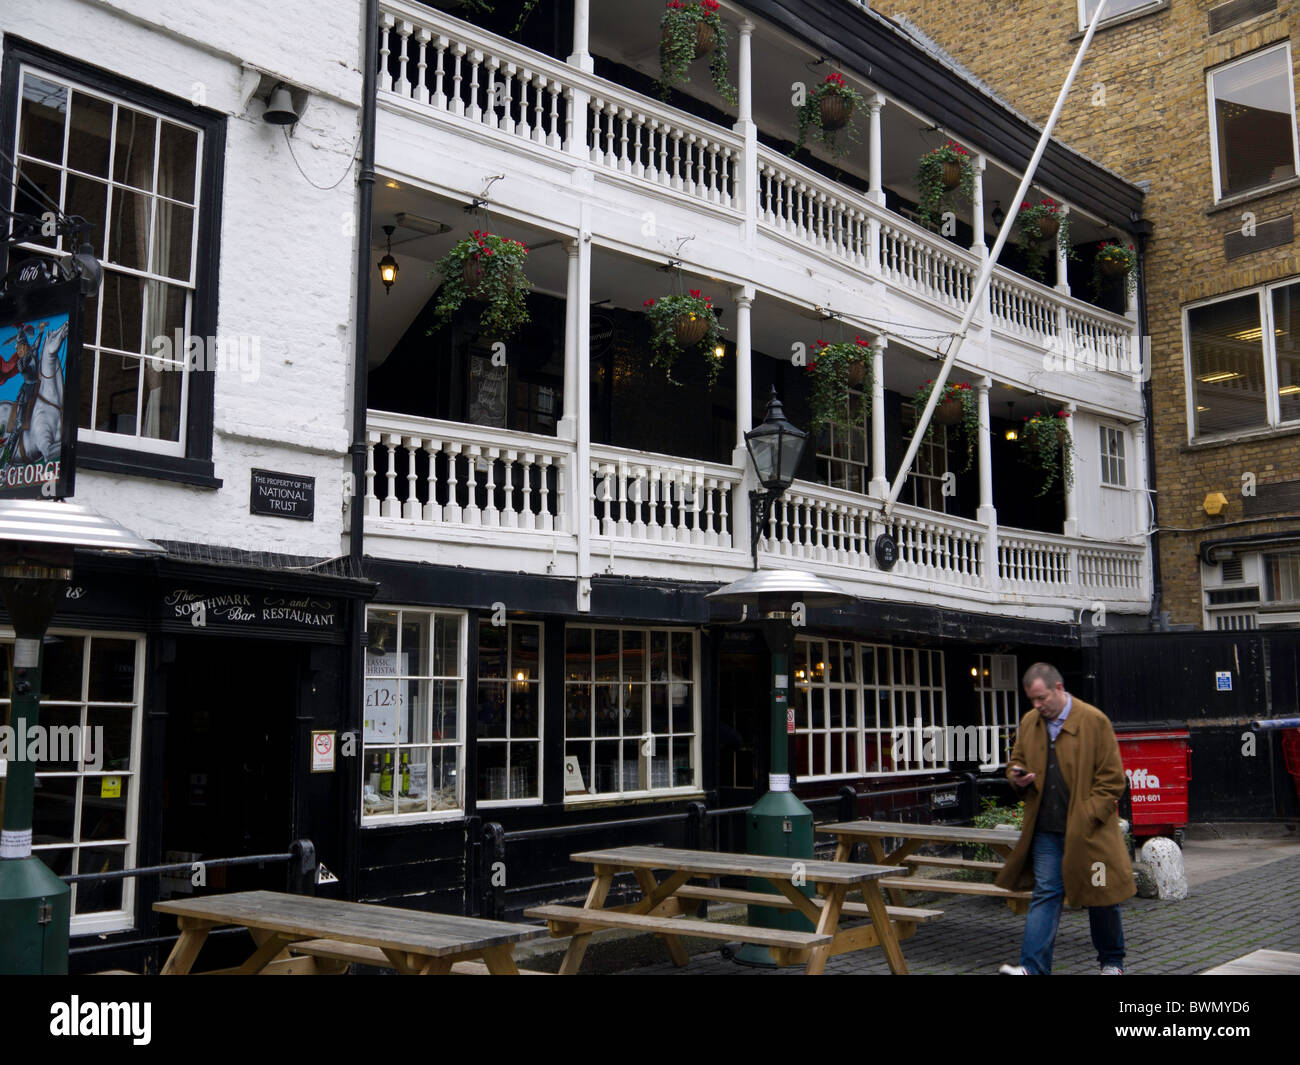 The George Pub is London's only surviving galleried coaching inn. The George Pub, Borough, London Stock Photo